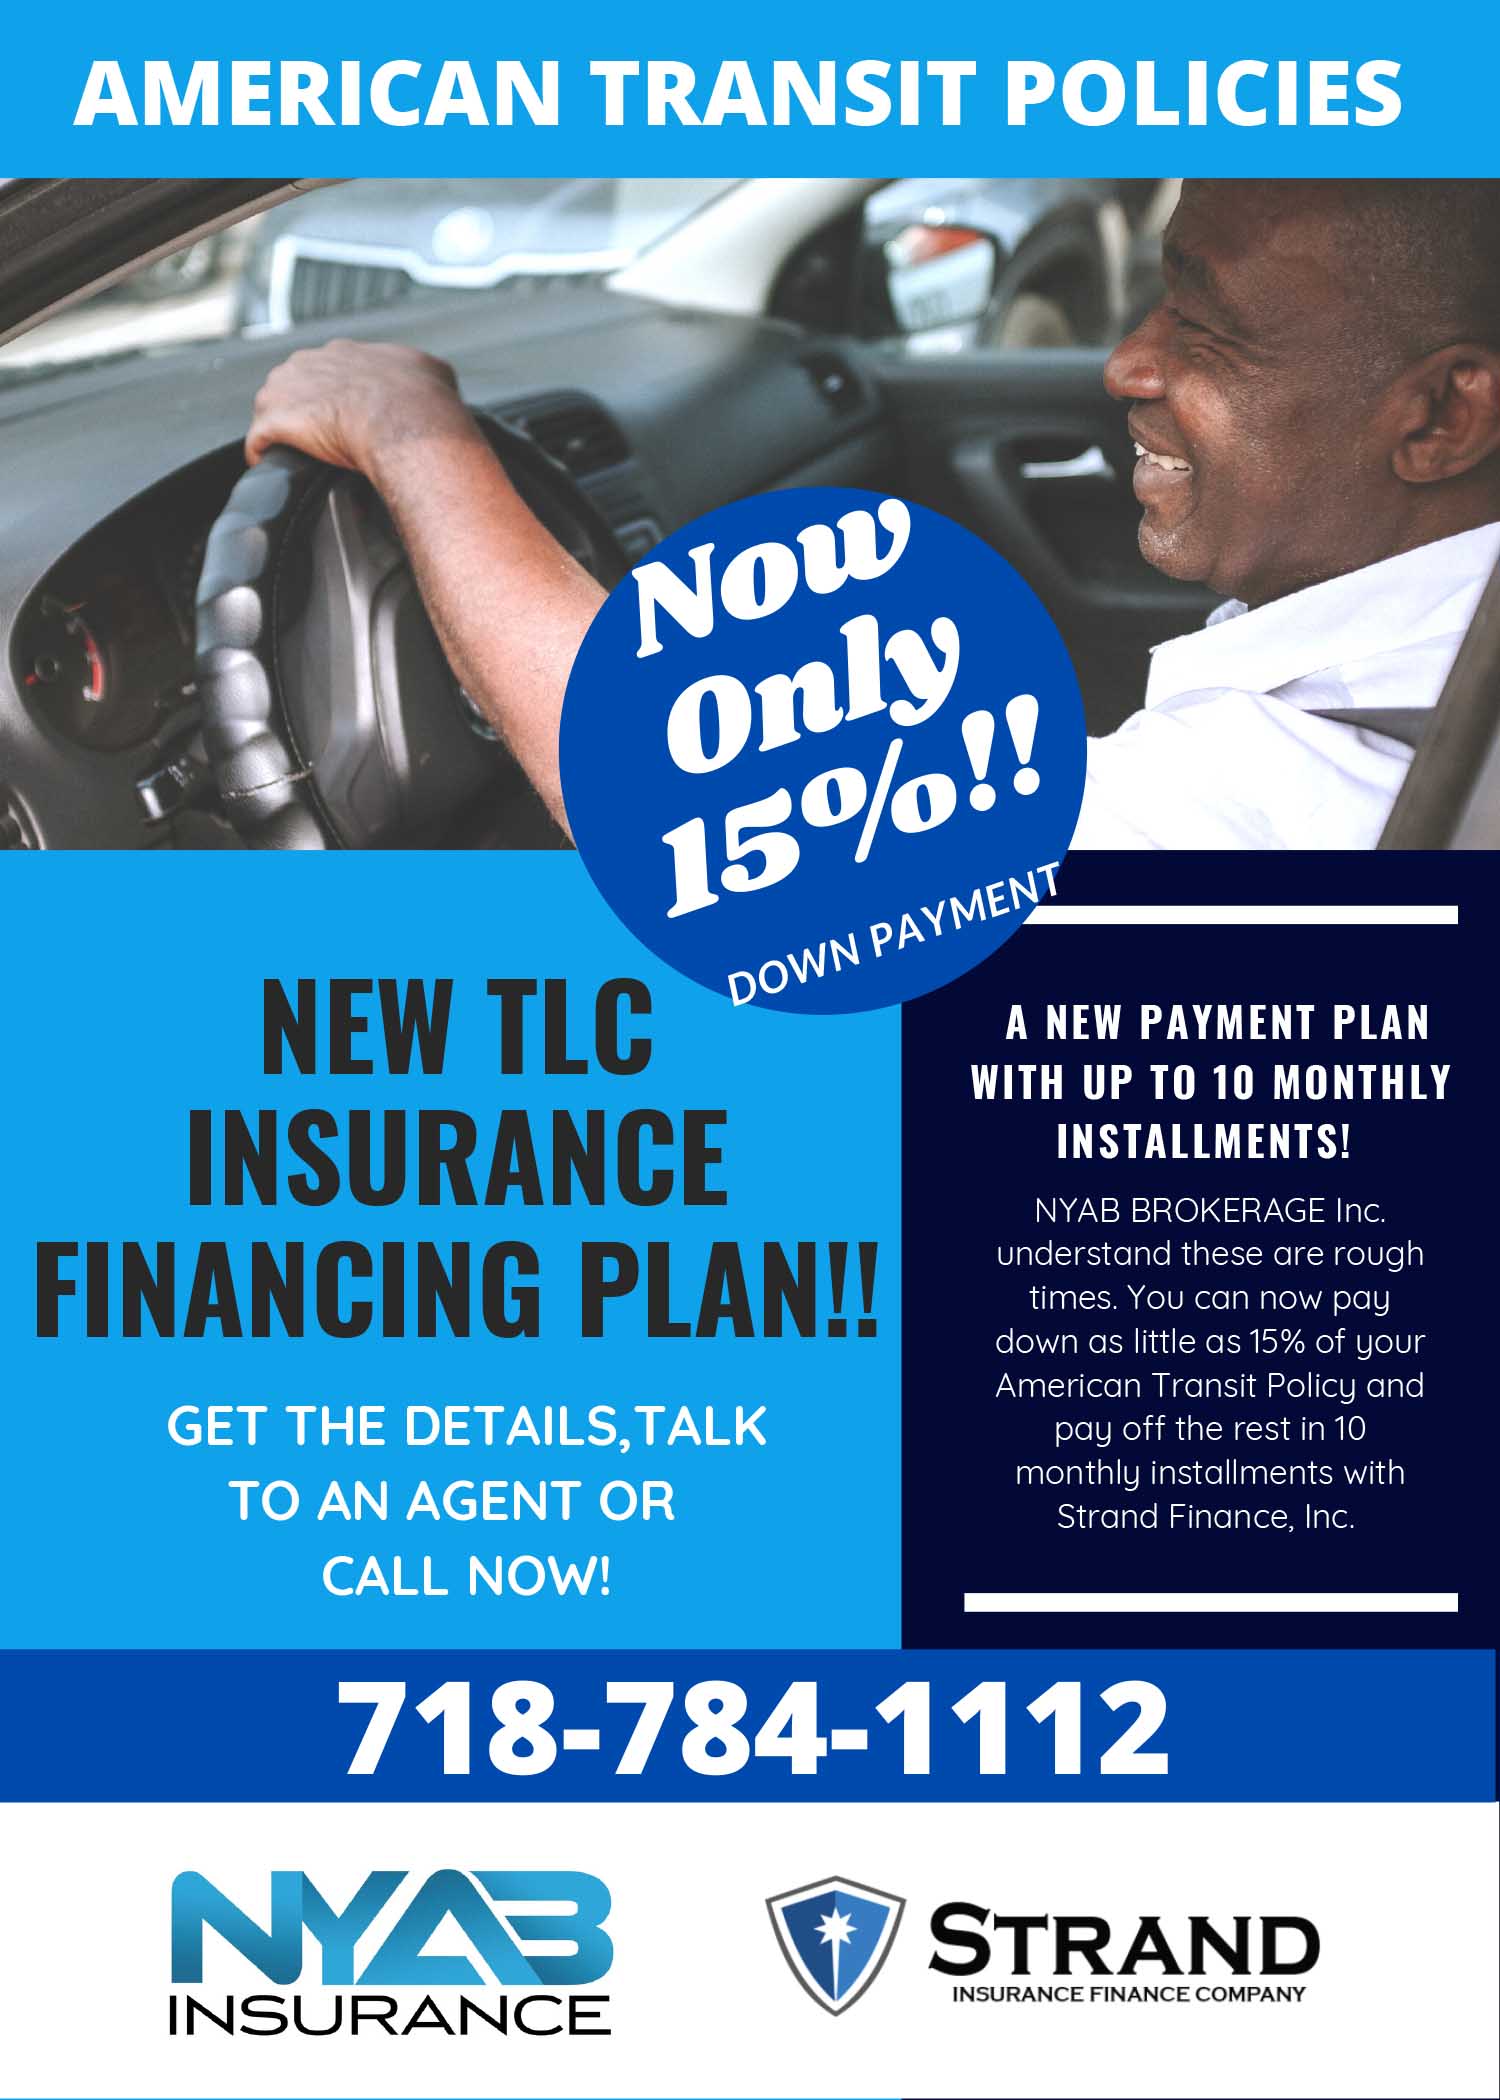 NYAB BROKERAGE Inc. understands these are rough times. You can now pay down as little as 15% of your American Transit Policy and pay off the rest in 10 monthly installments with Strand Finance, Inc.